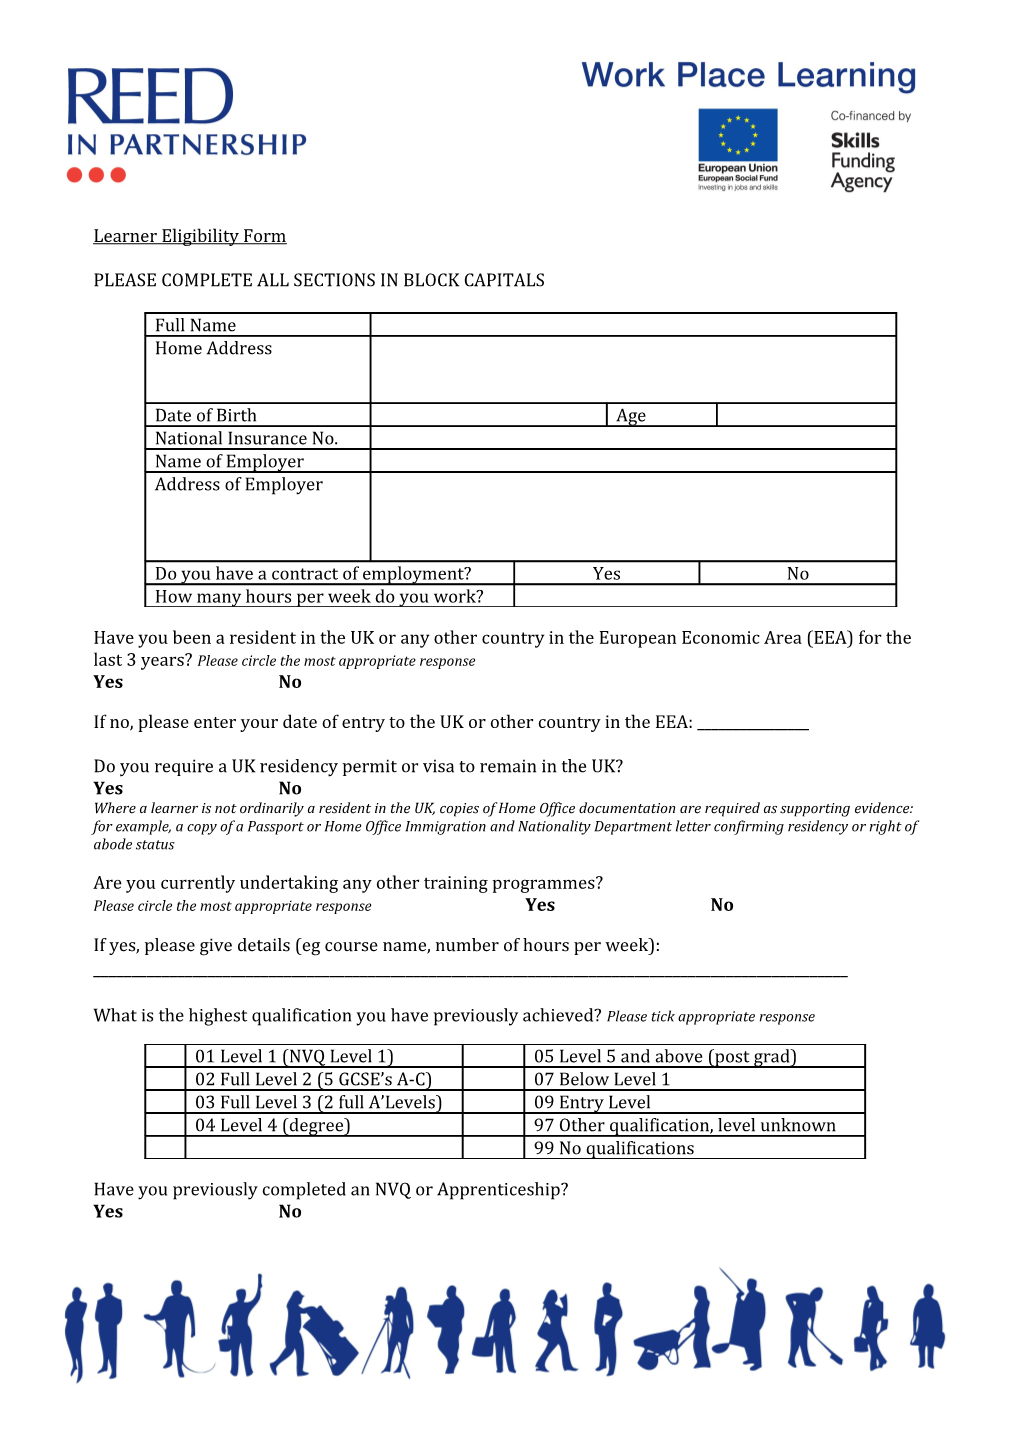 Learner Eligibility Form